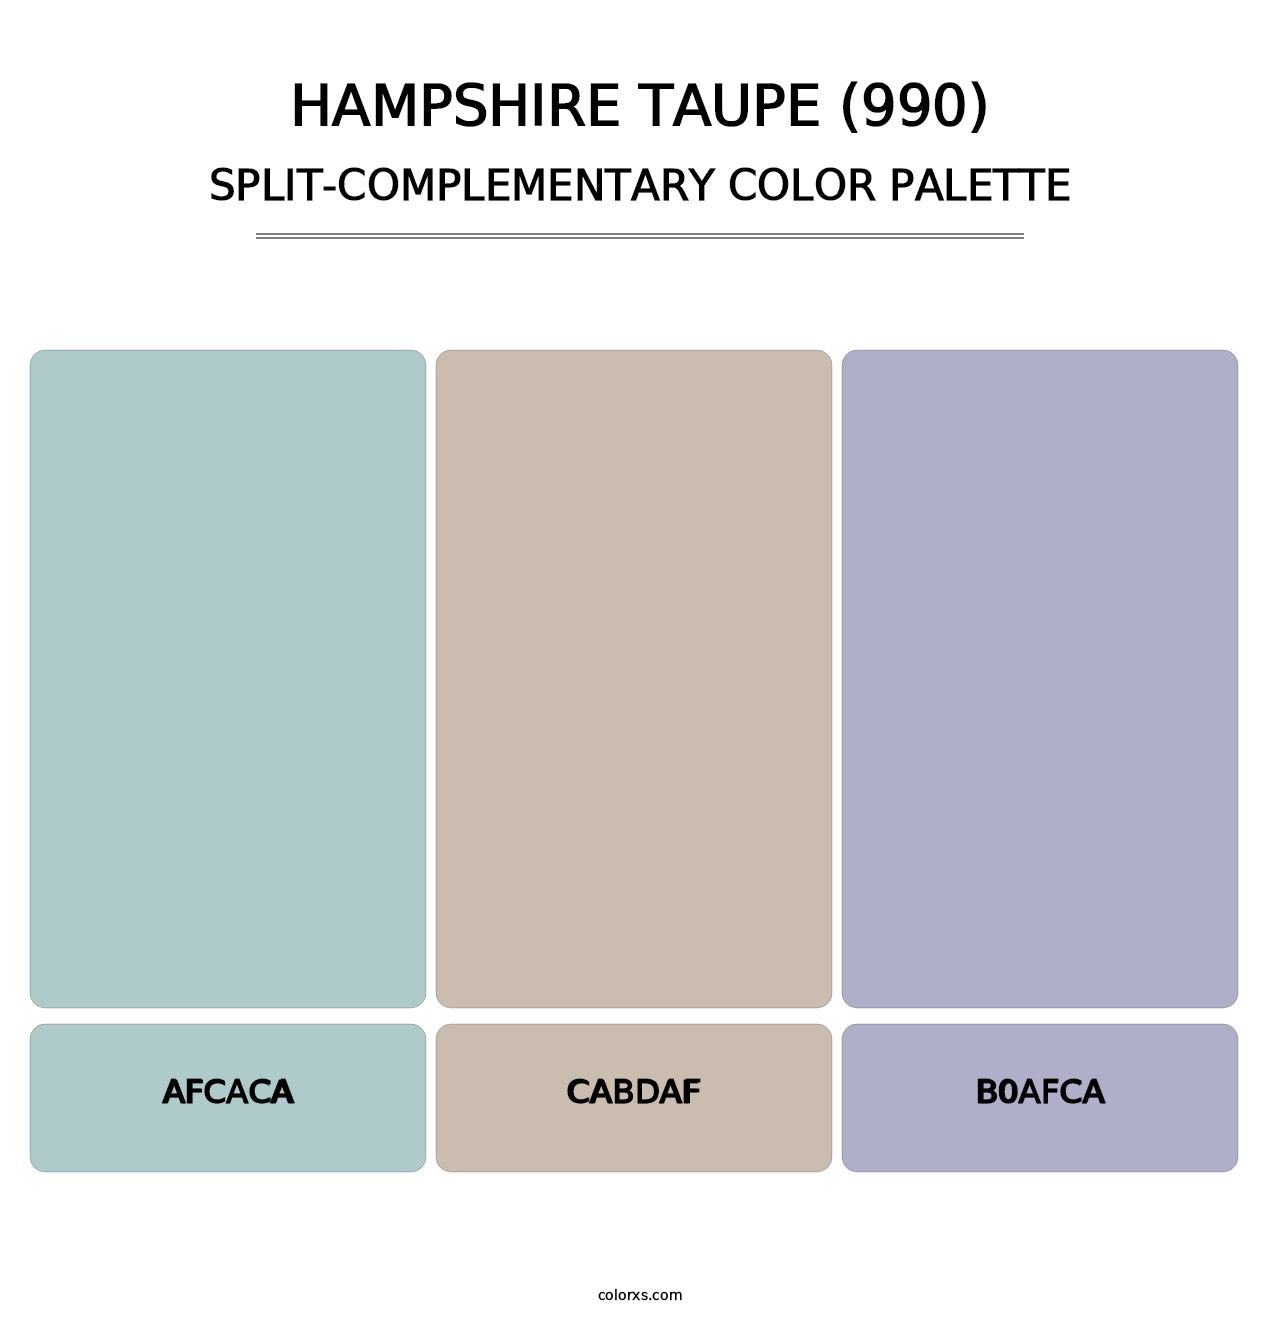 Hampshire Taupe (990) - Split-Complementary Color Palette